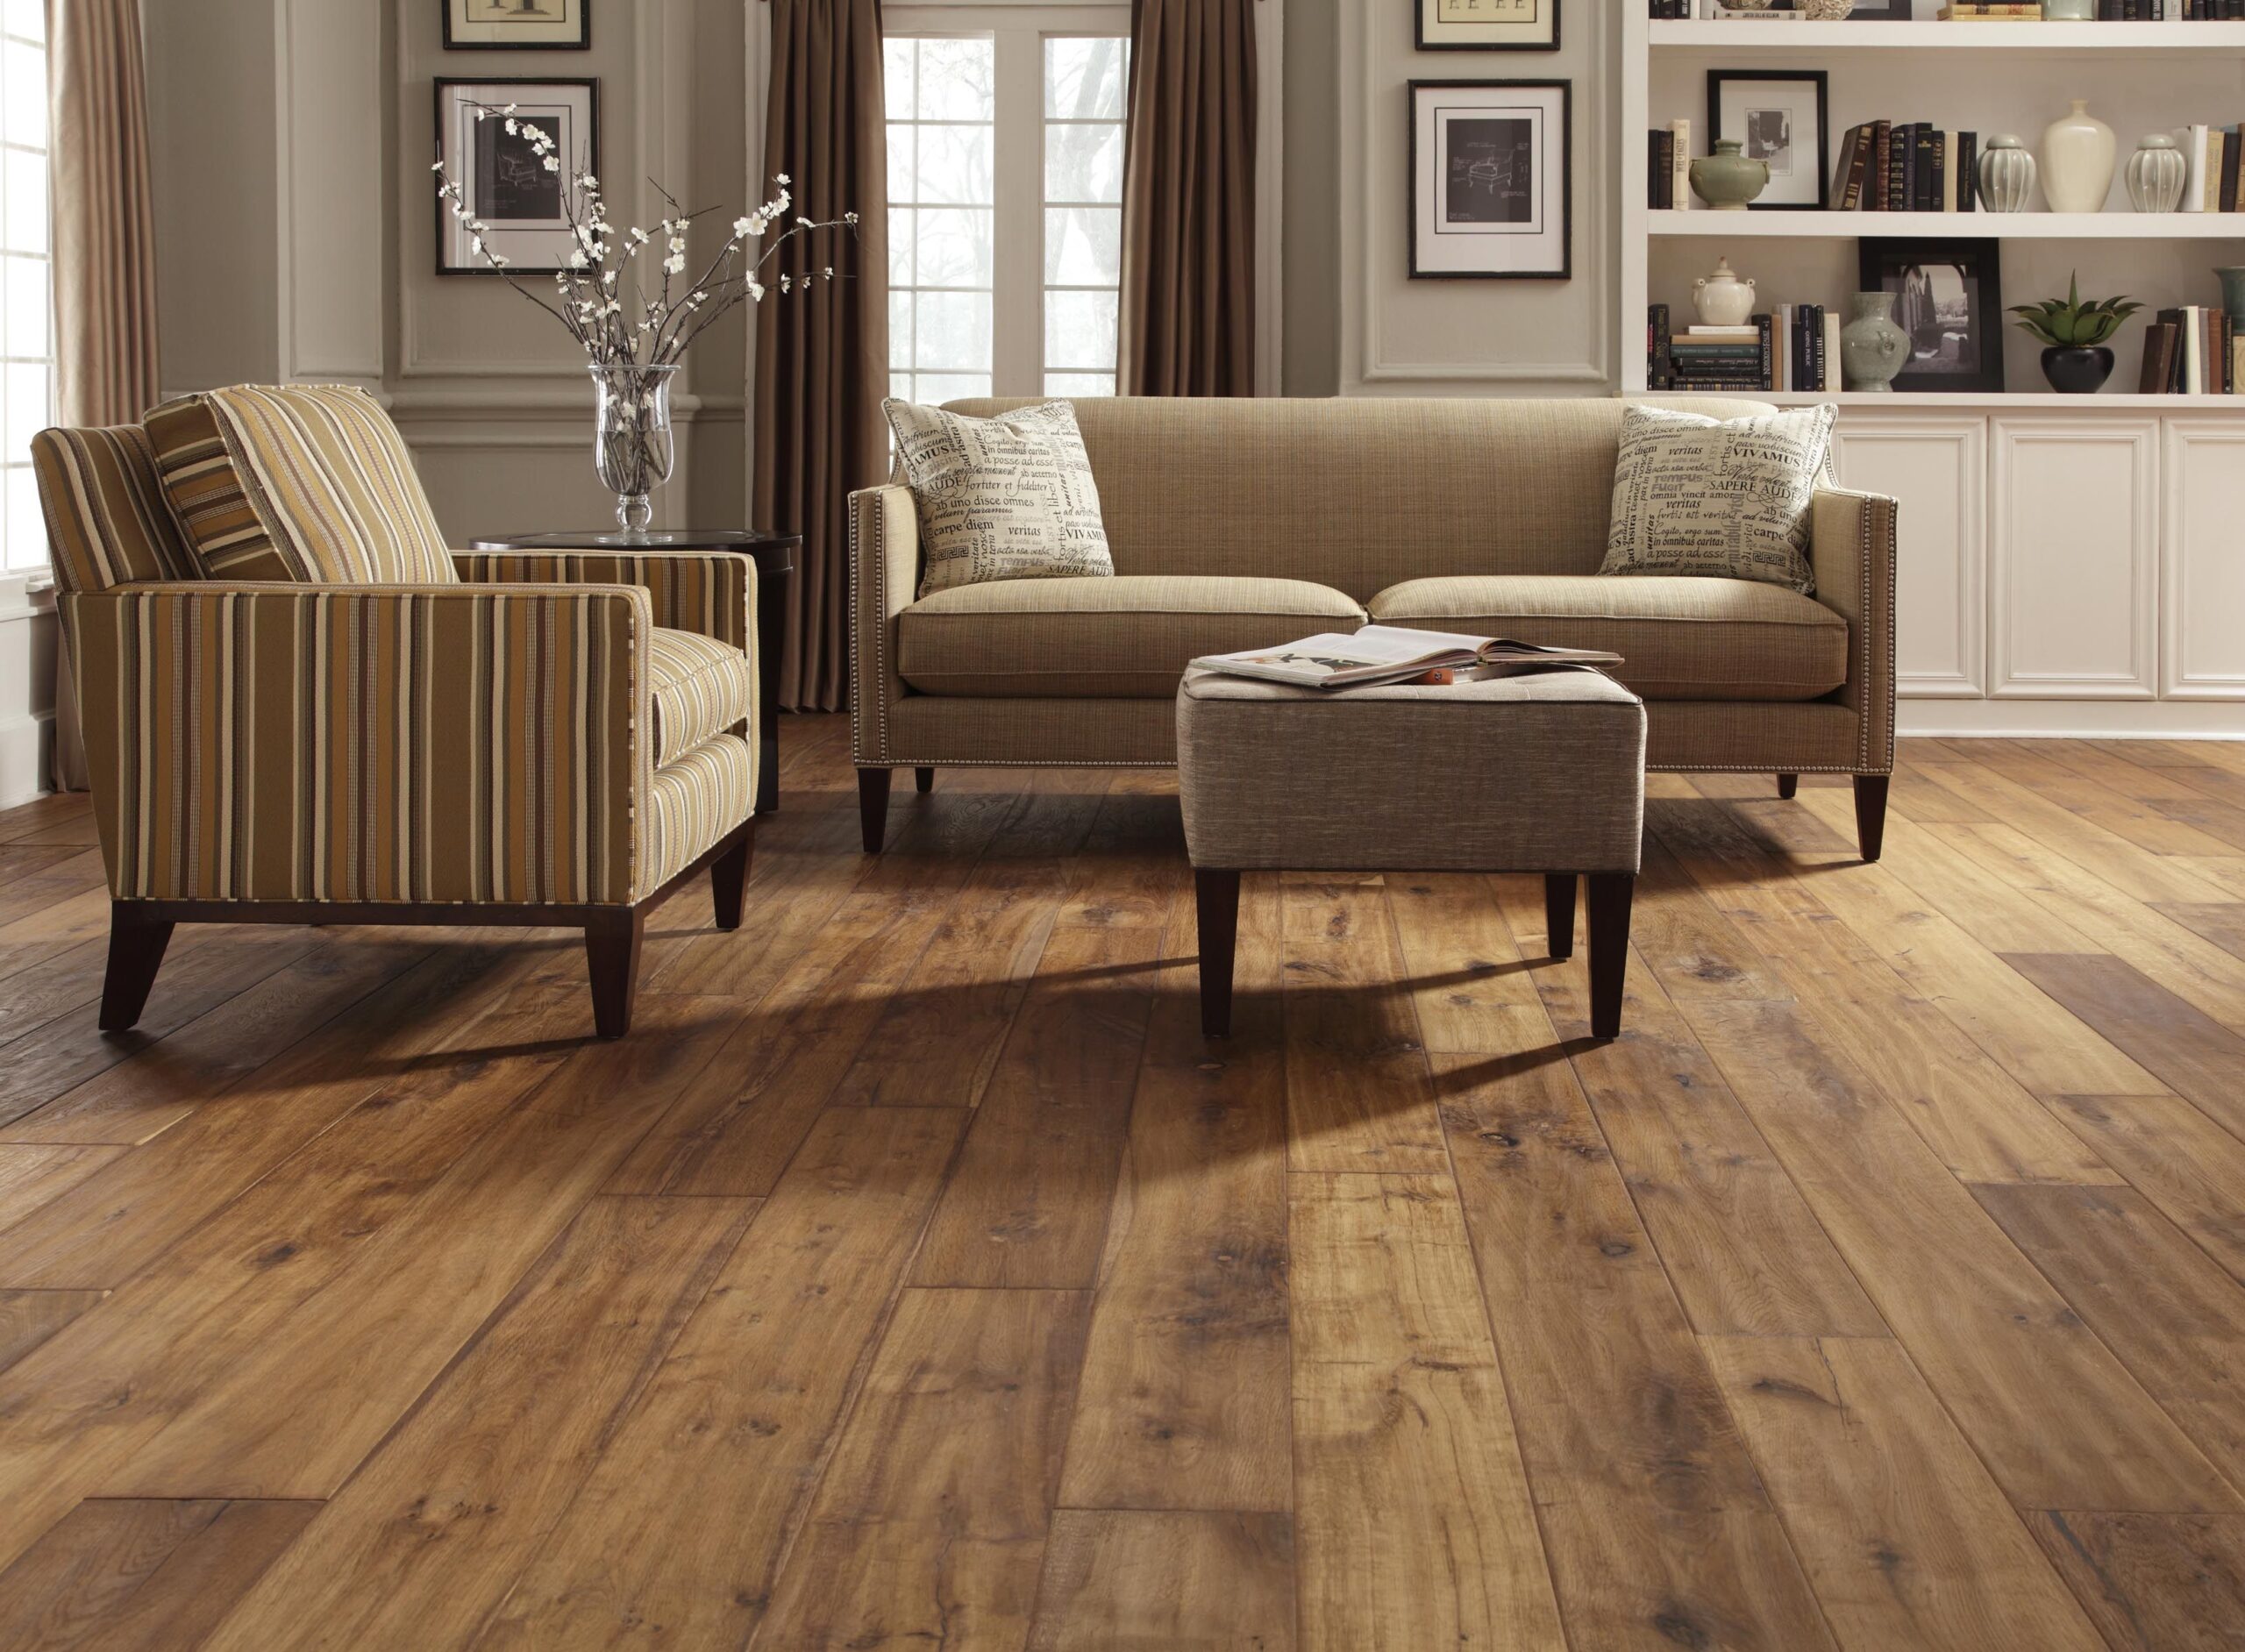 5 Best Laminate Flooring Colours For, What Is The Most Popular Laminate Flooring Color